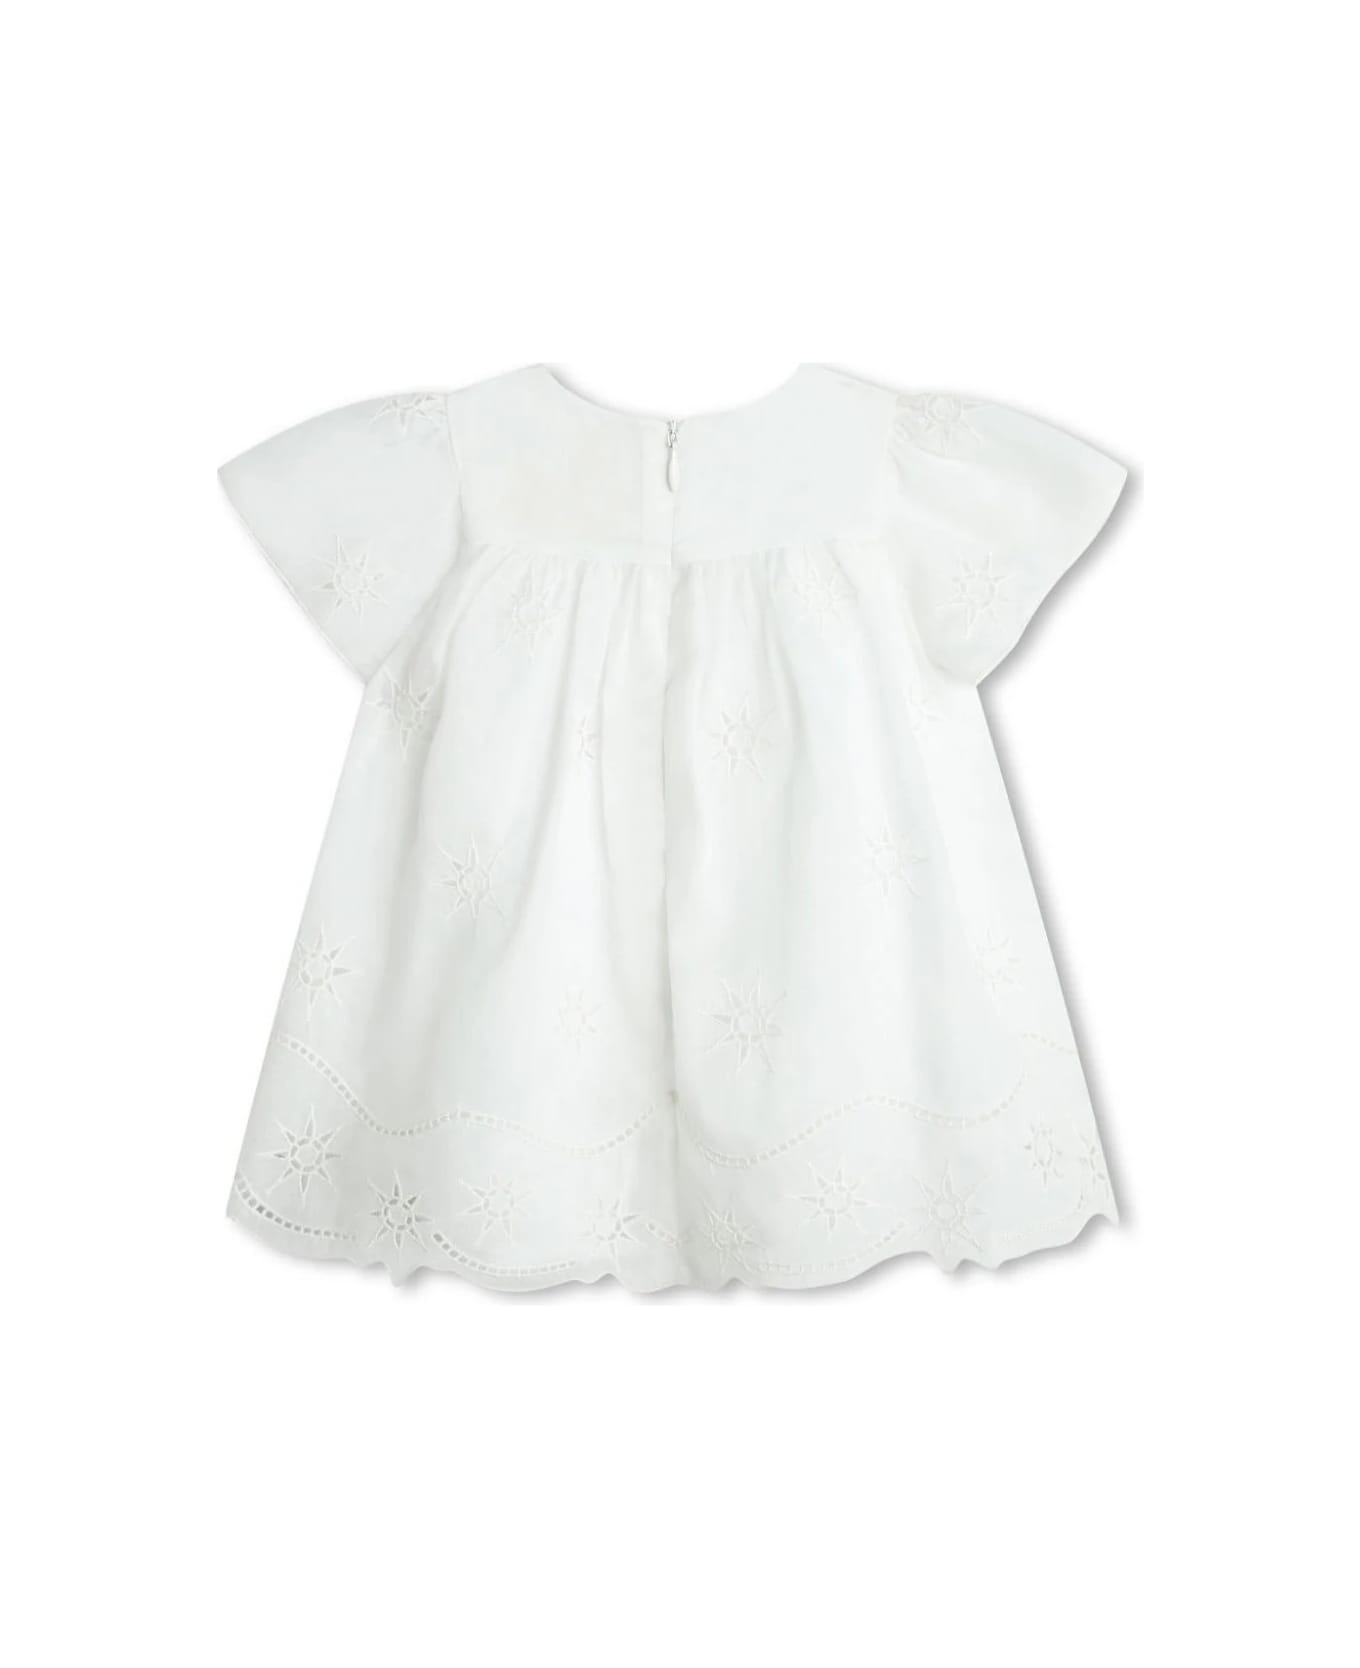 Chloé White Dress With Embroidered Stars - White